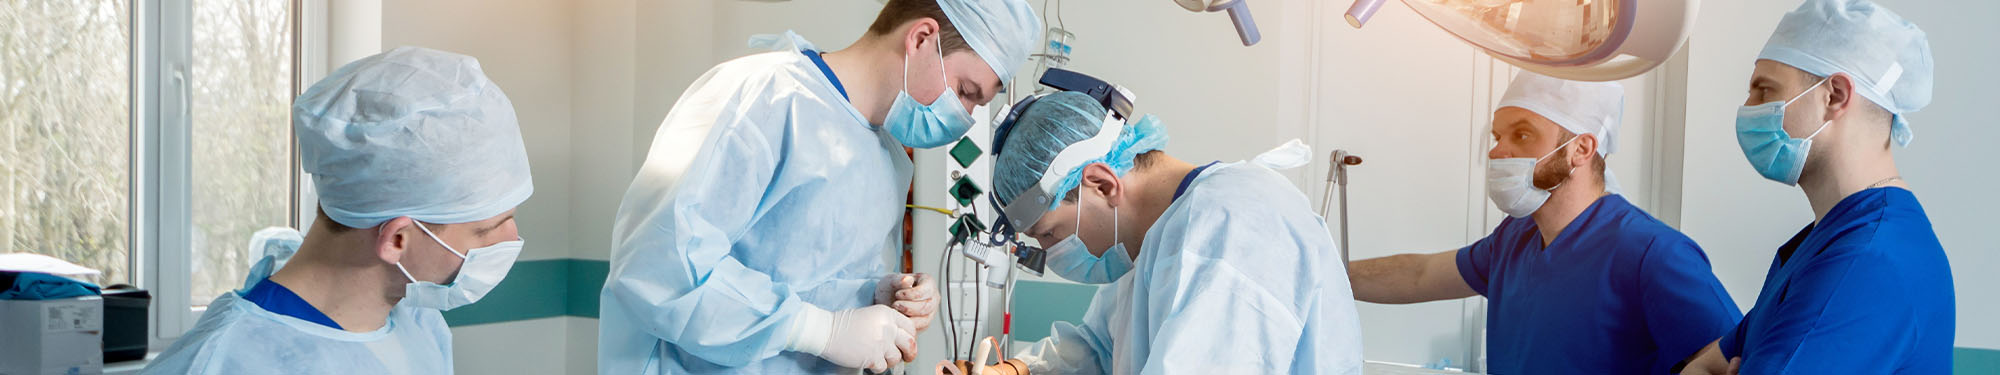 doctors and nurses performing surgery